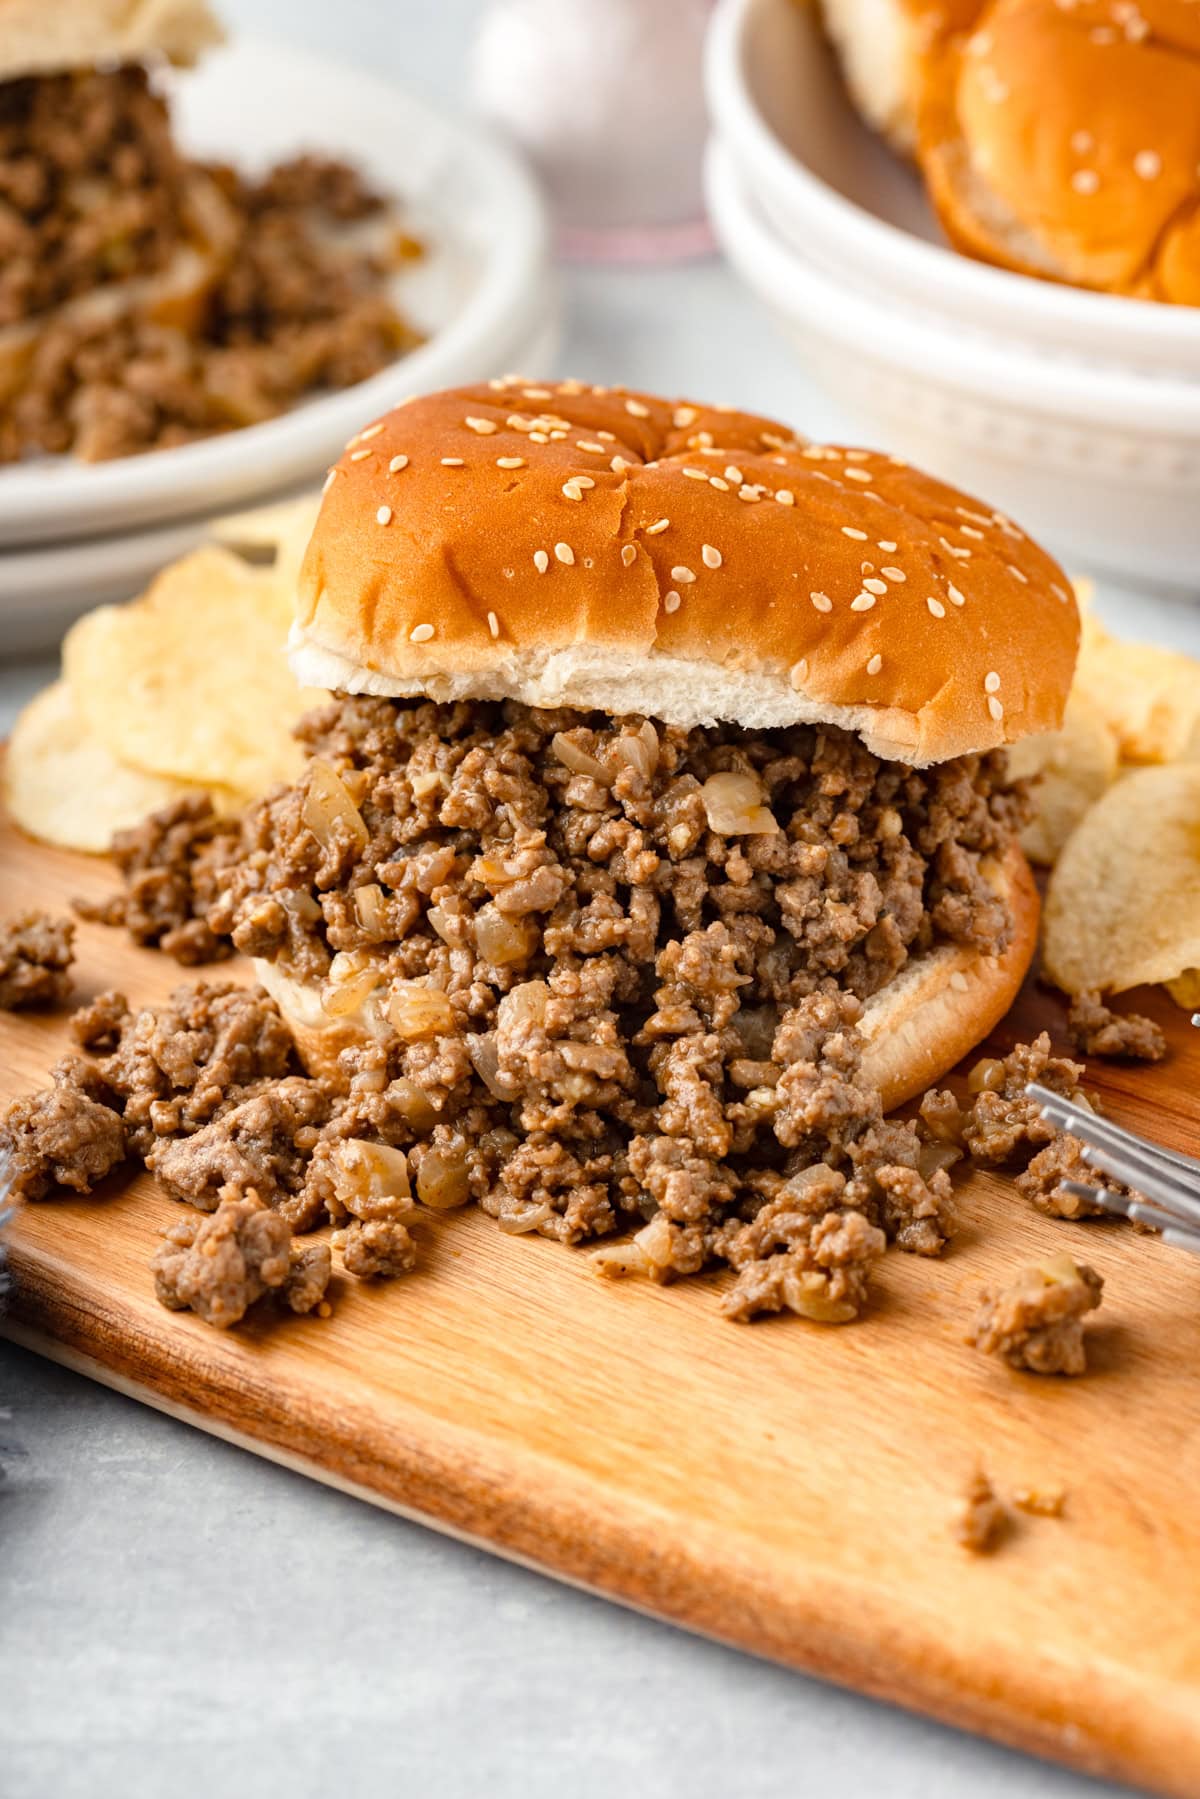 Seasoned, cooked ground beef on a hamburger bun with it spilling over onto a wood cutting board.